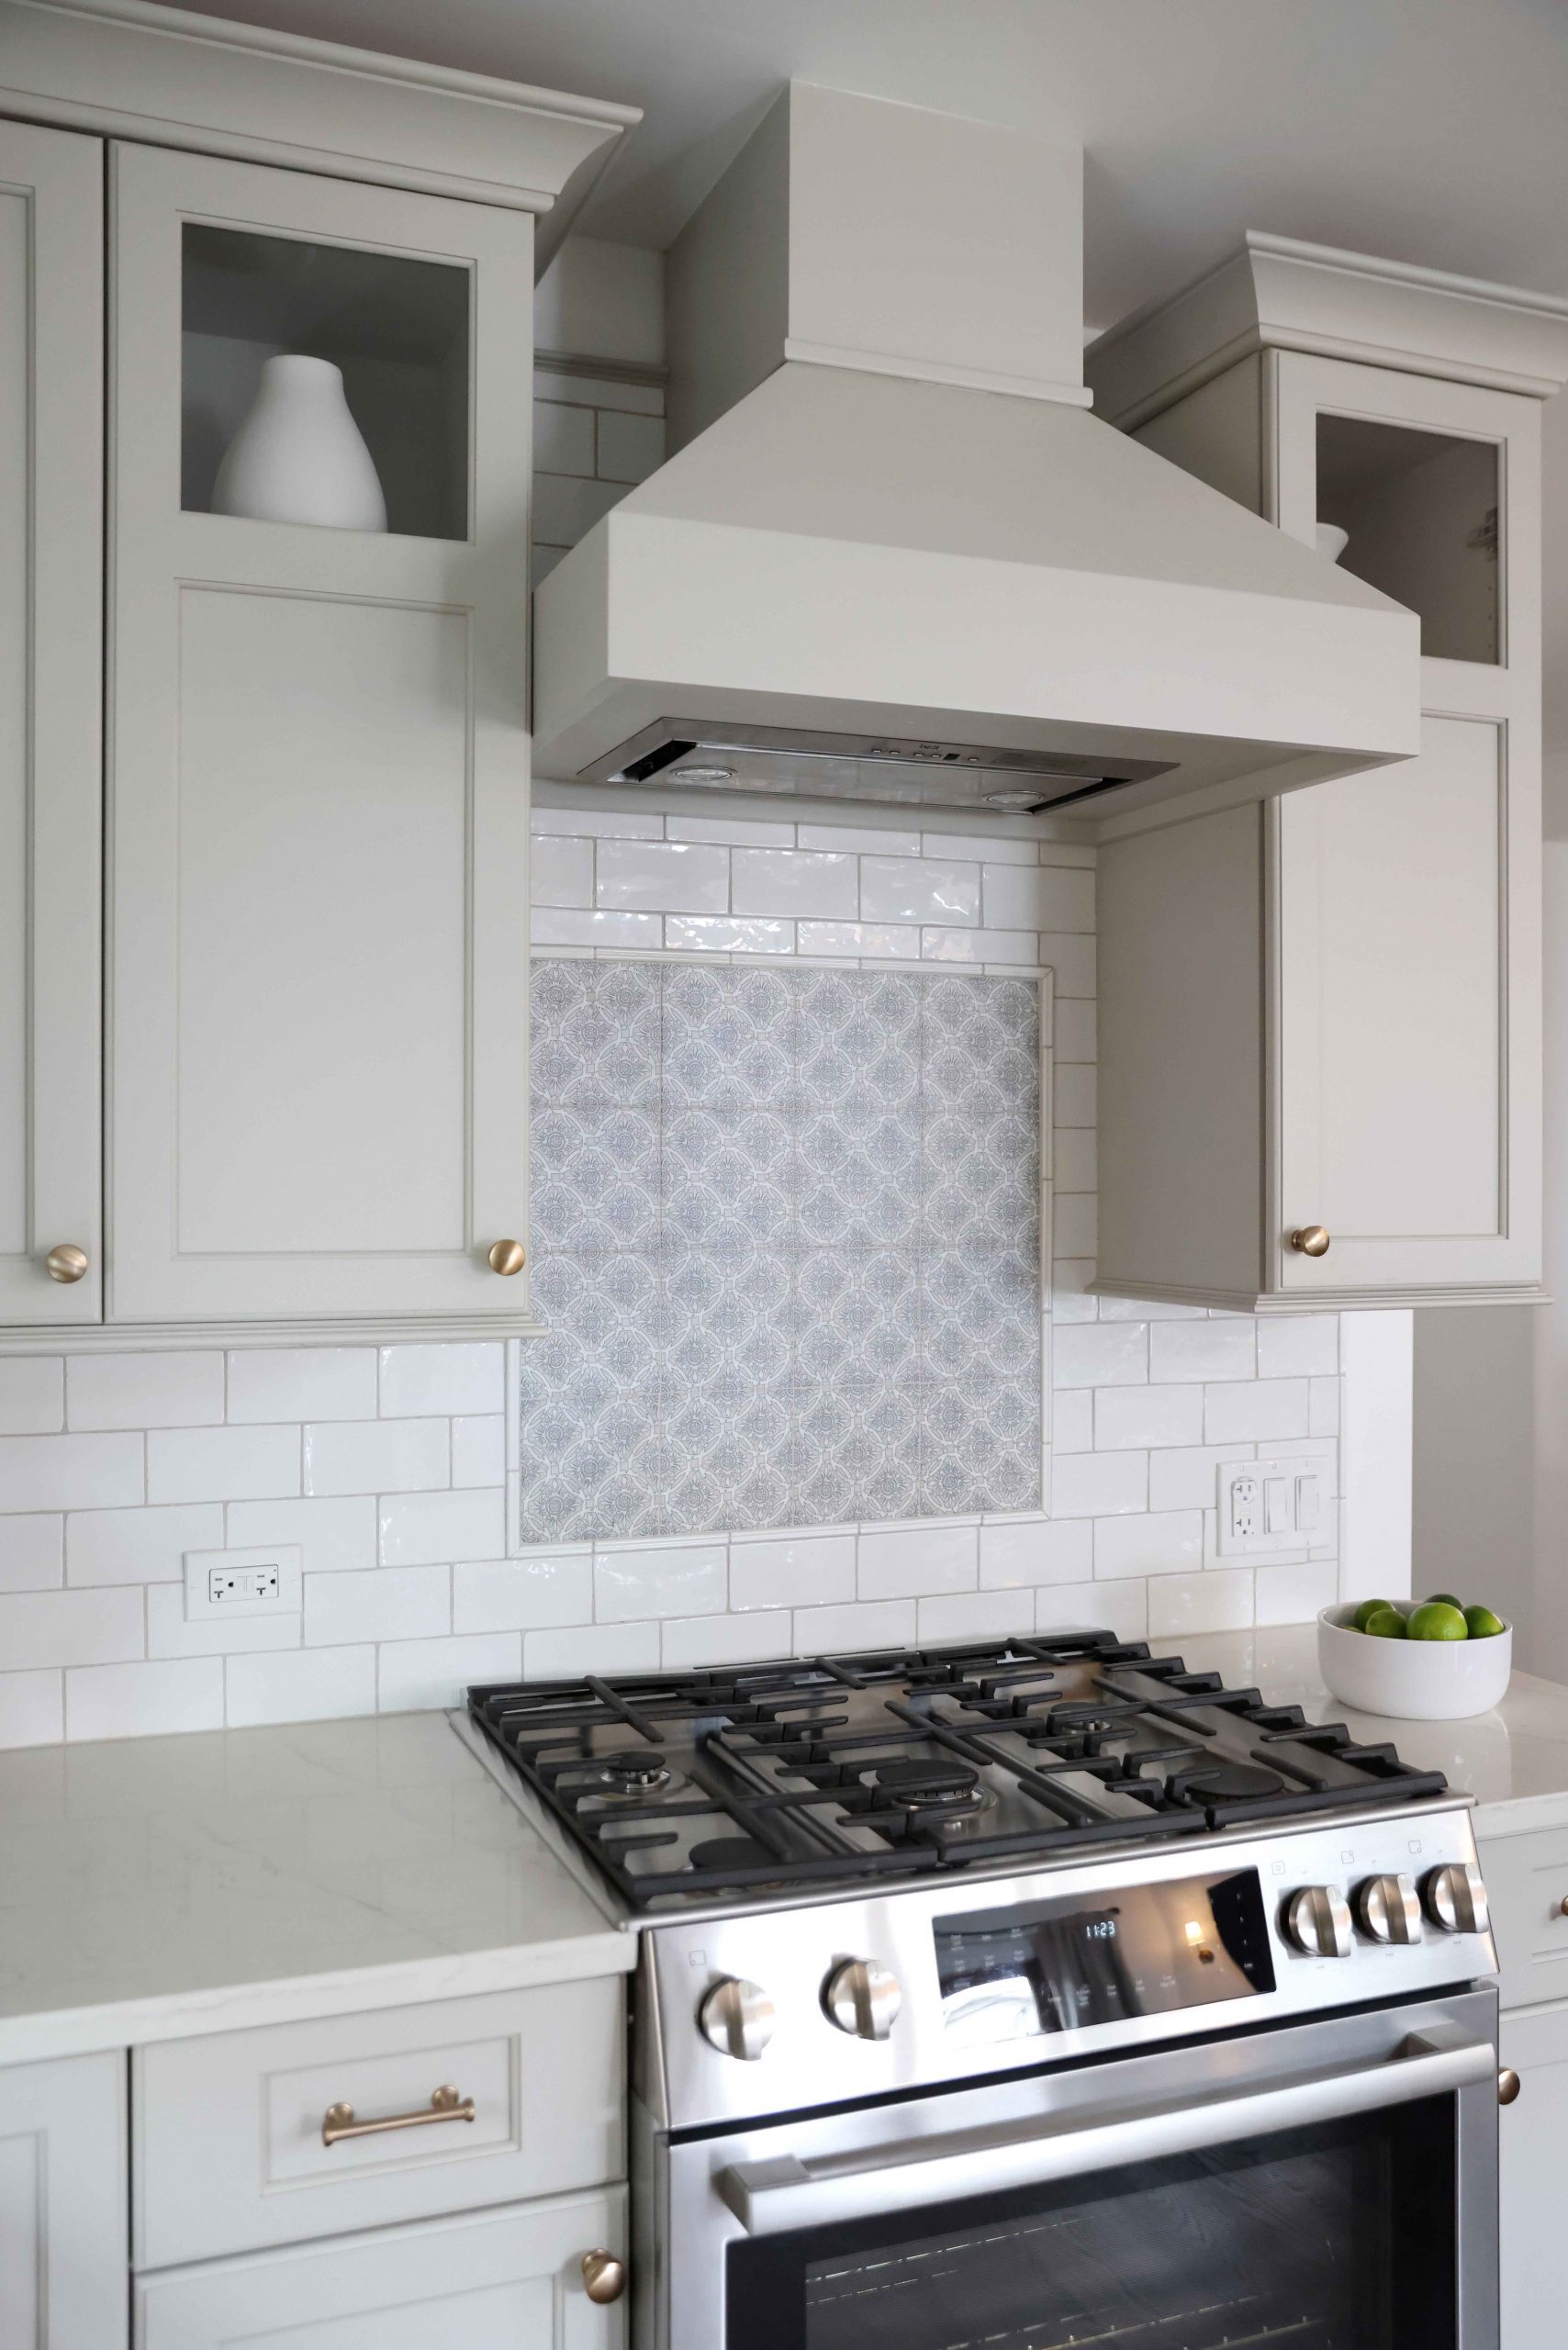 backsplash to the ceiling, small painted hood range and special tile niche over range, upper cabinets with partially open front doors